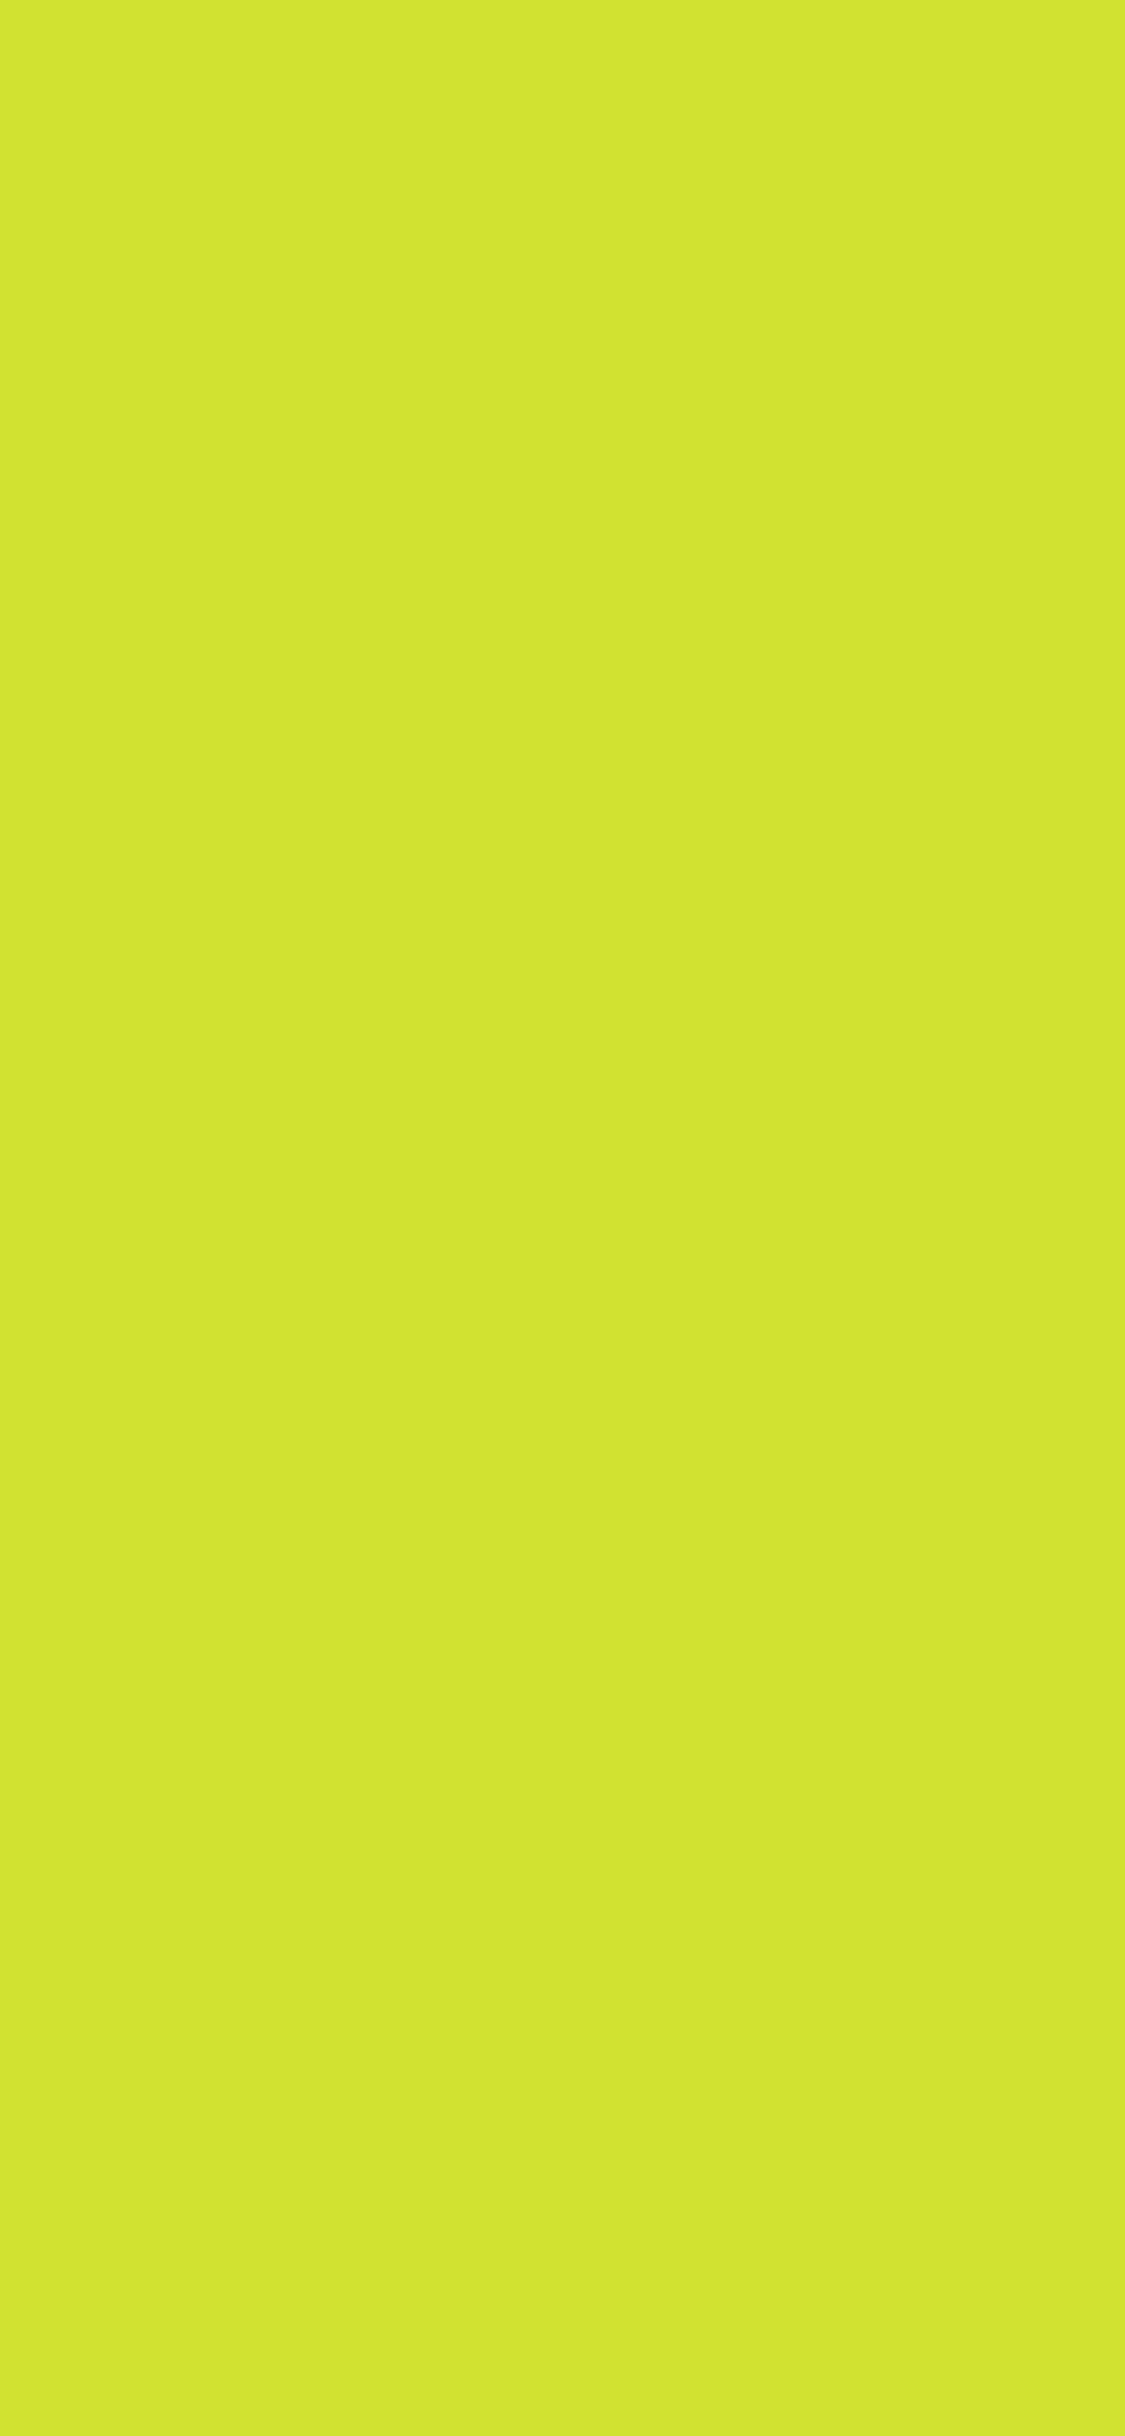 1125x2436 Pear Solid Color Background